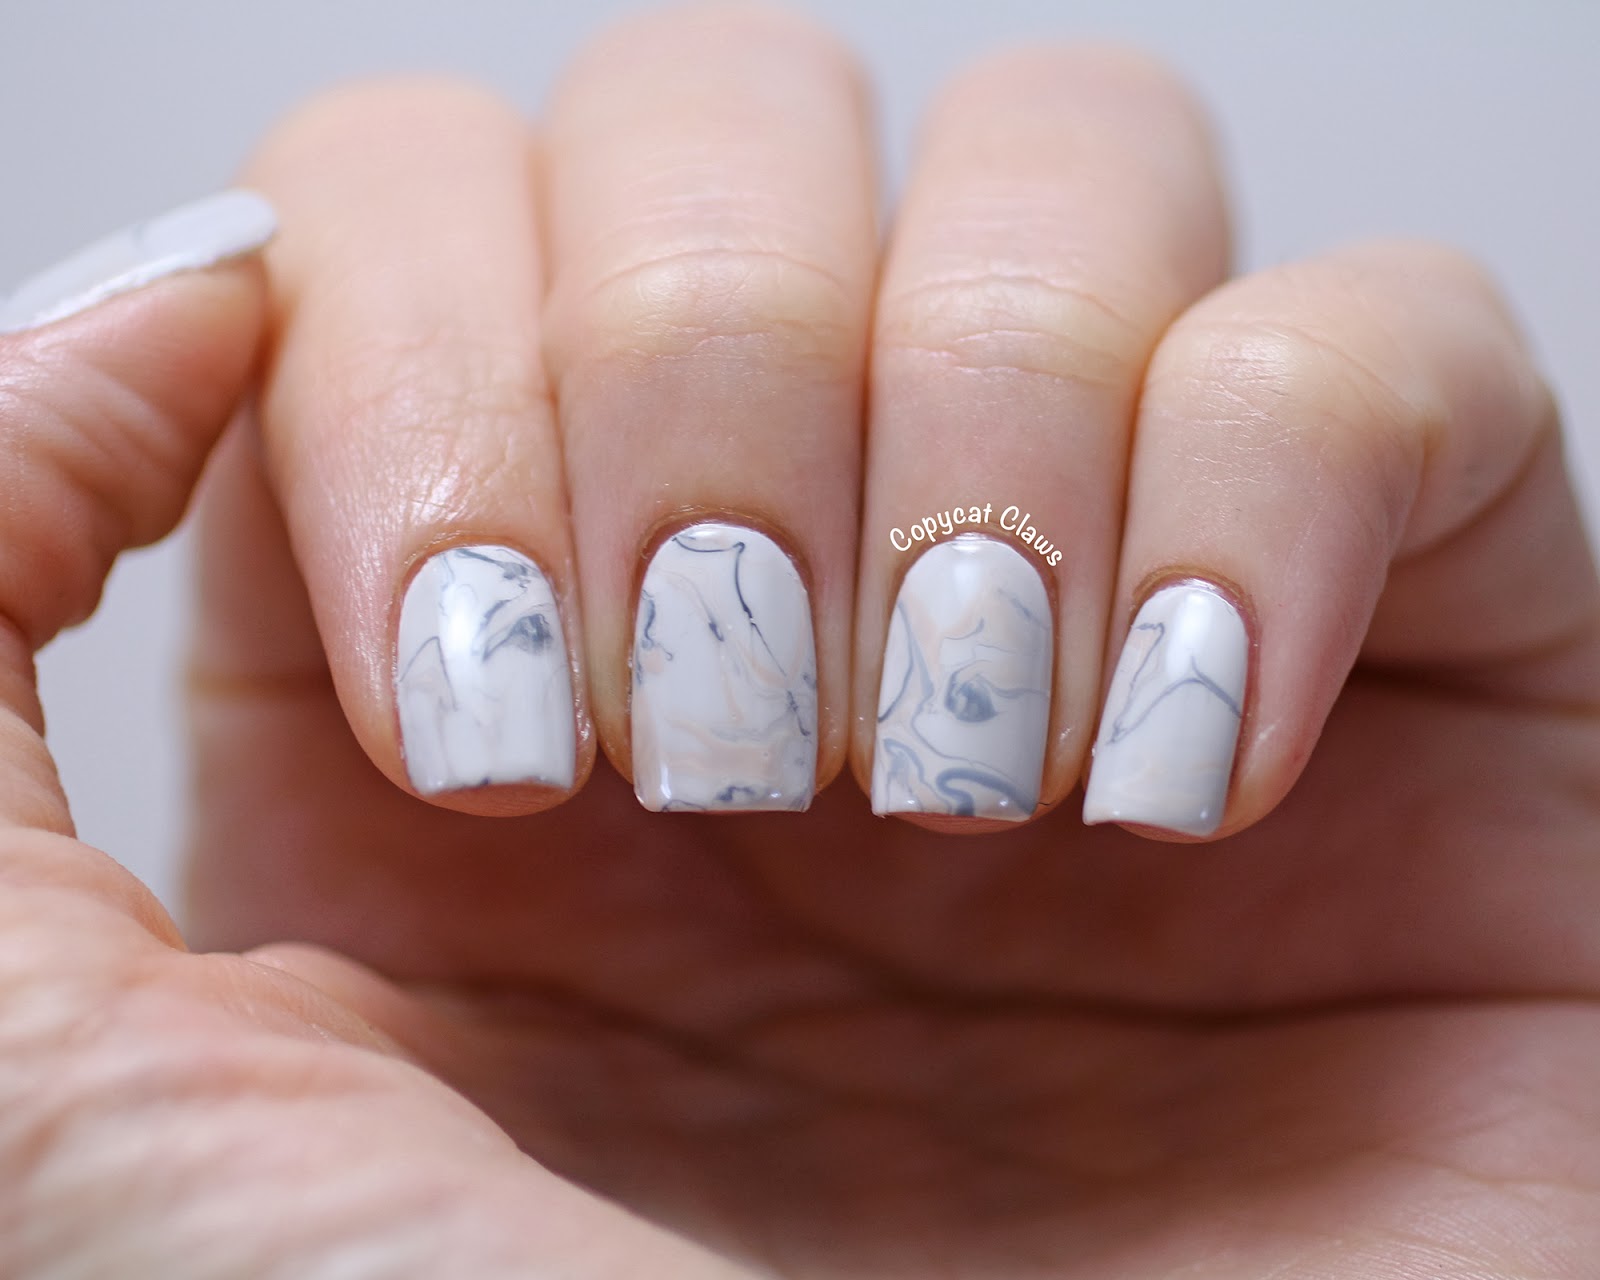 Stylish Nail Art Design Ideas To Wear in 2021 : Marble nails with Gold Lines